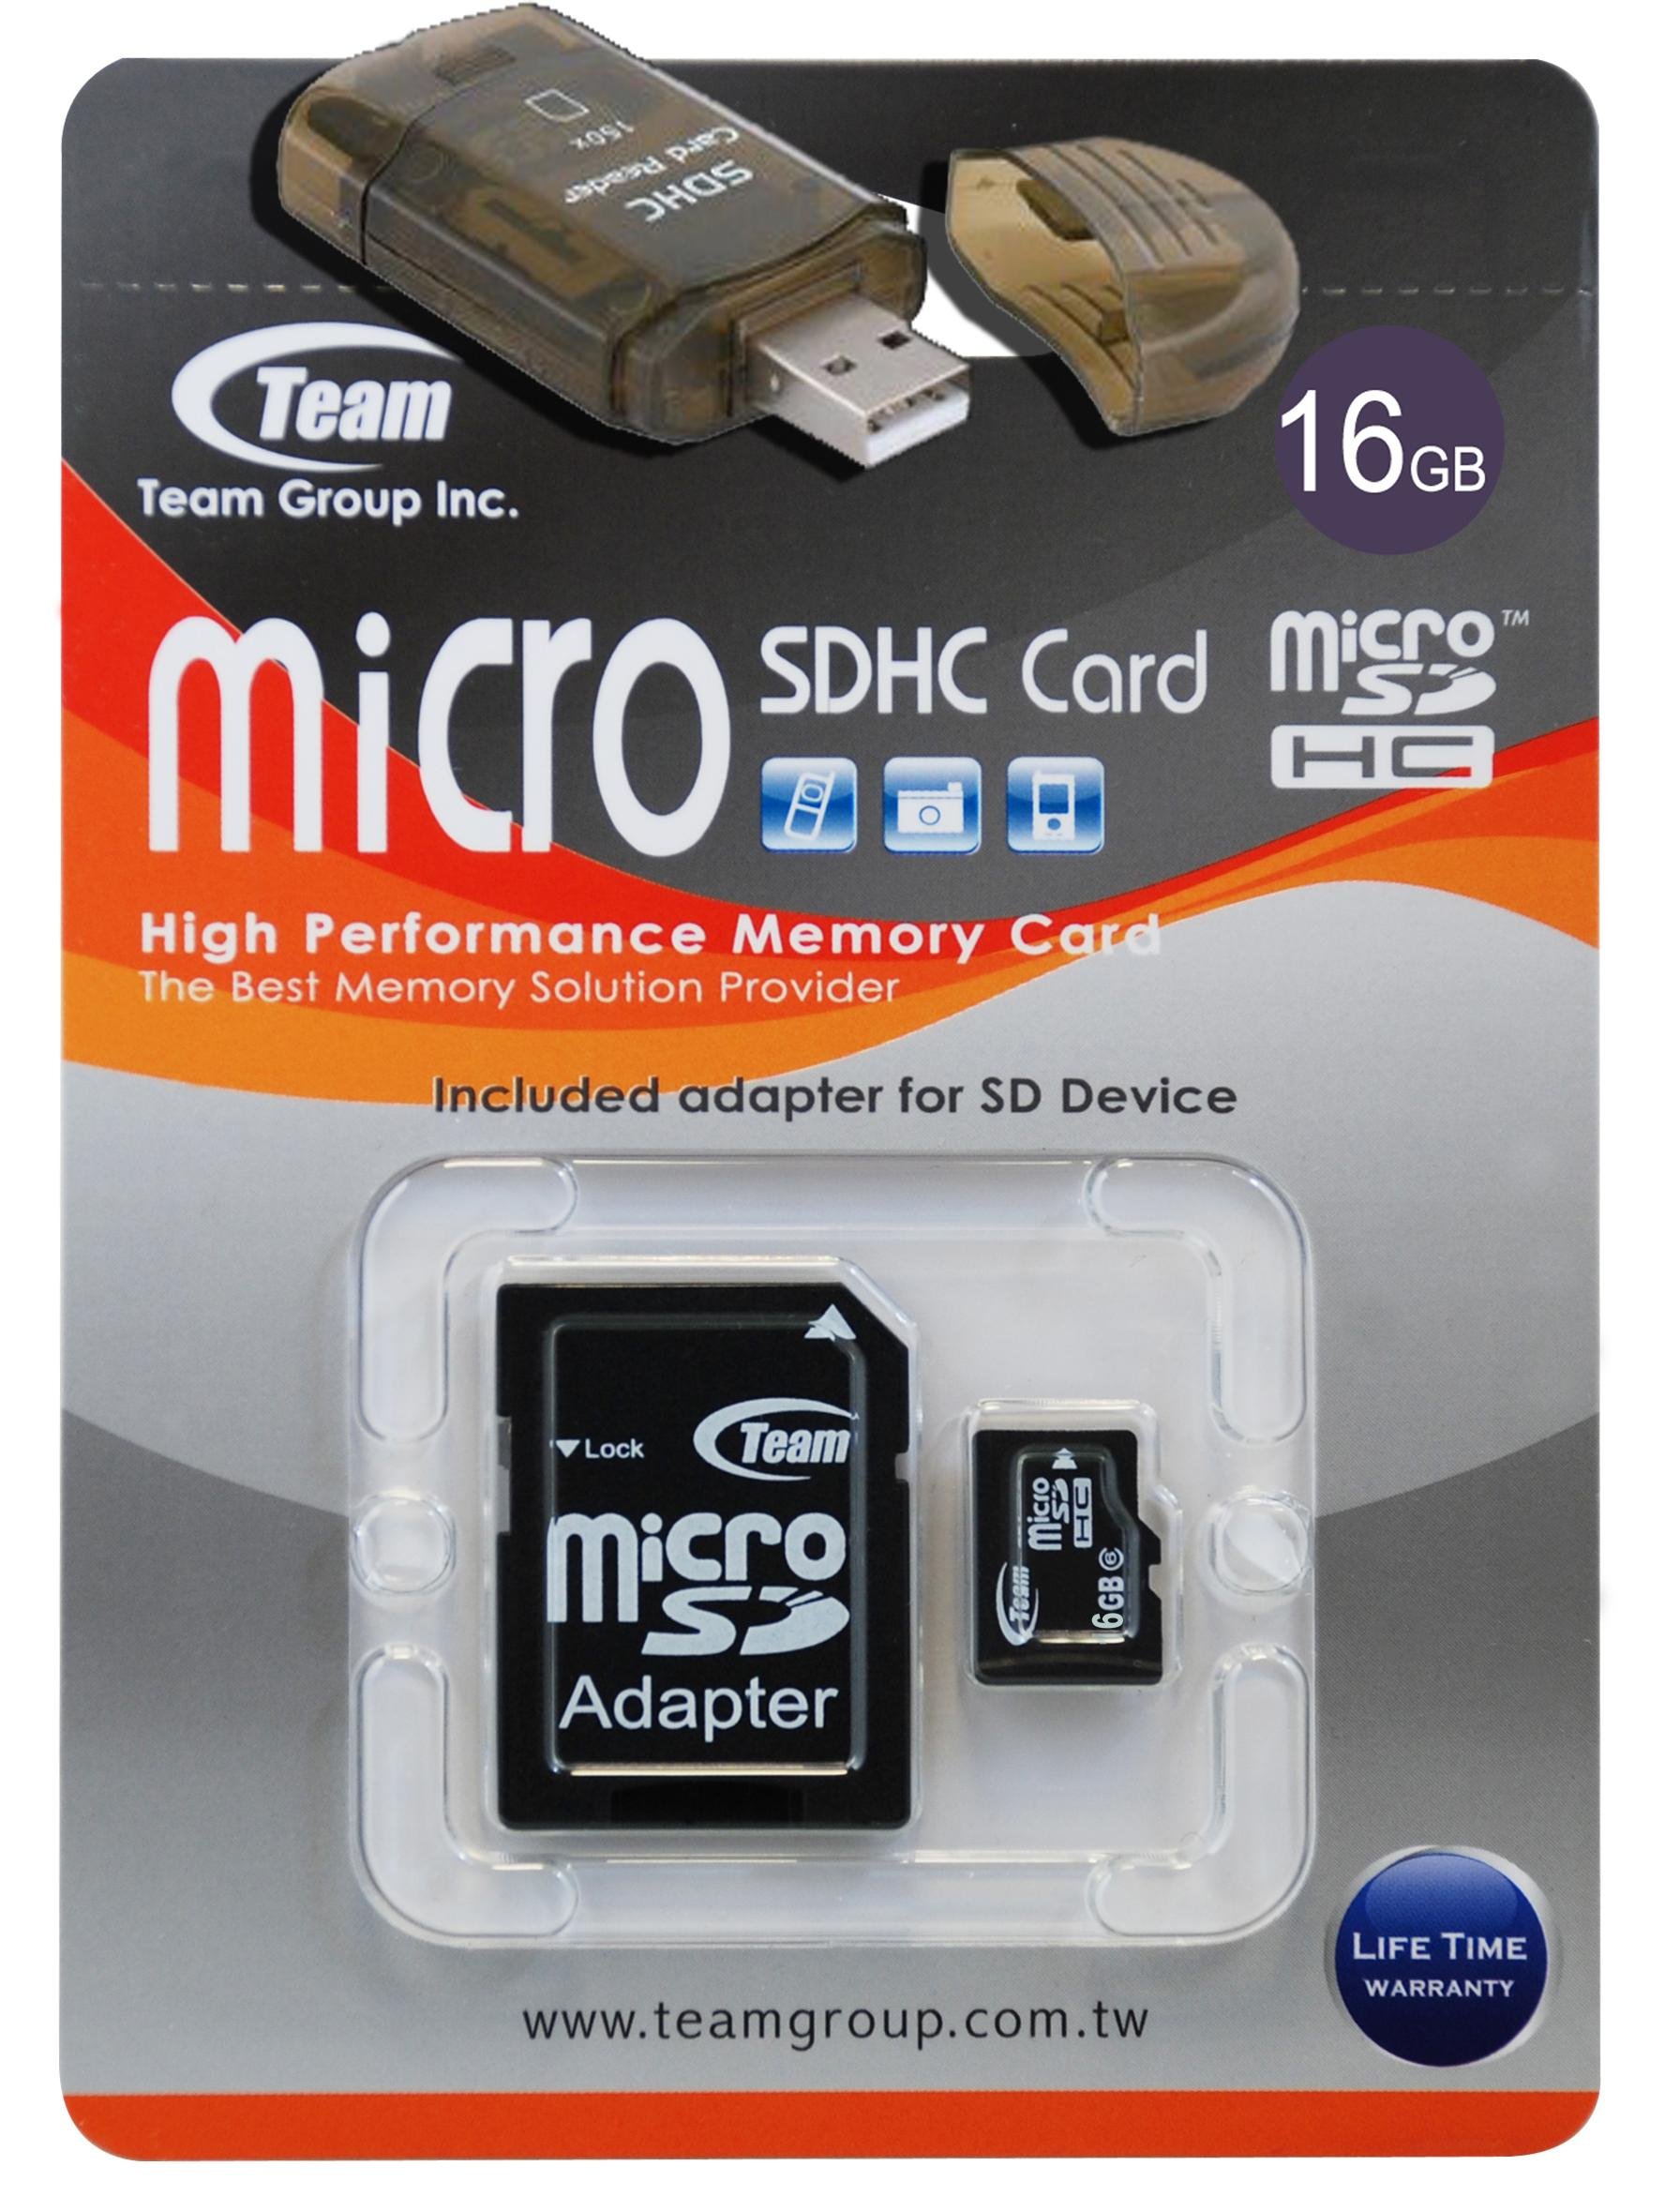 16GB Turbo Speed Class 6 MicroSDHC Memory Card For MOTOROLA W766 WX161 WX181. High Speed Card Comes with a free SD and USB Ad